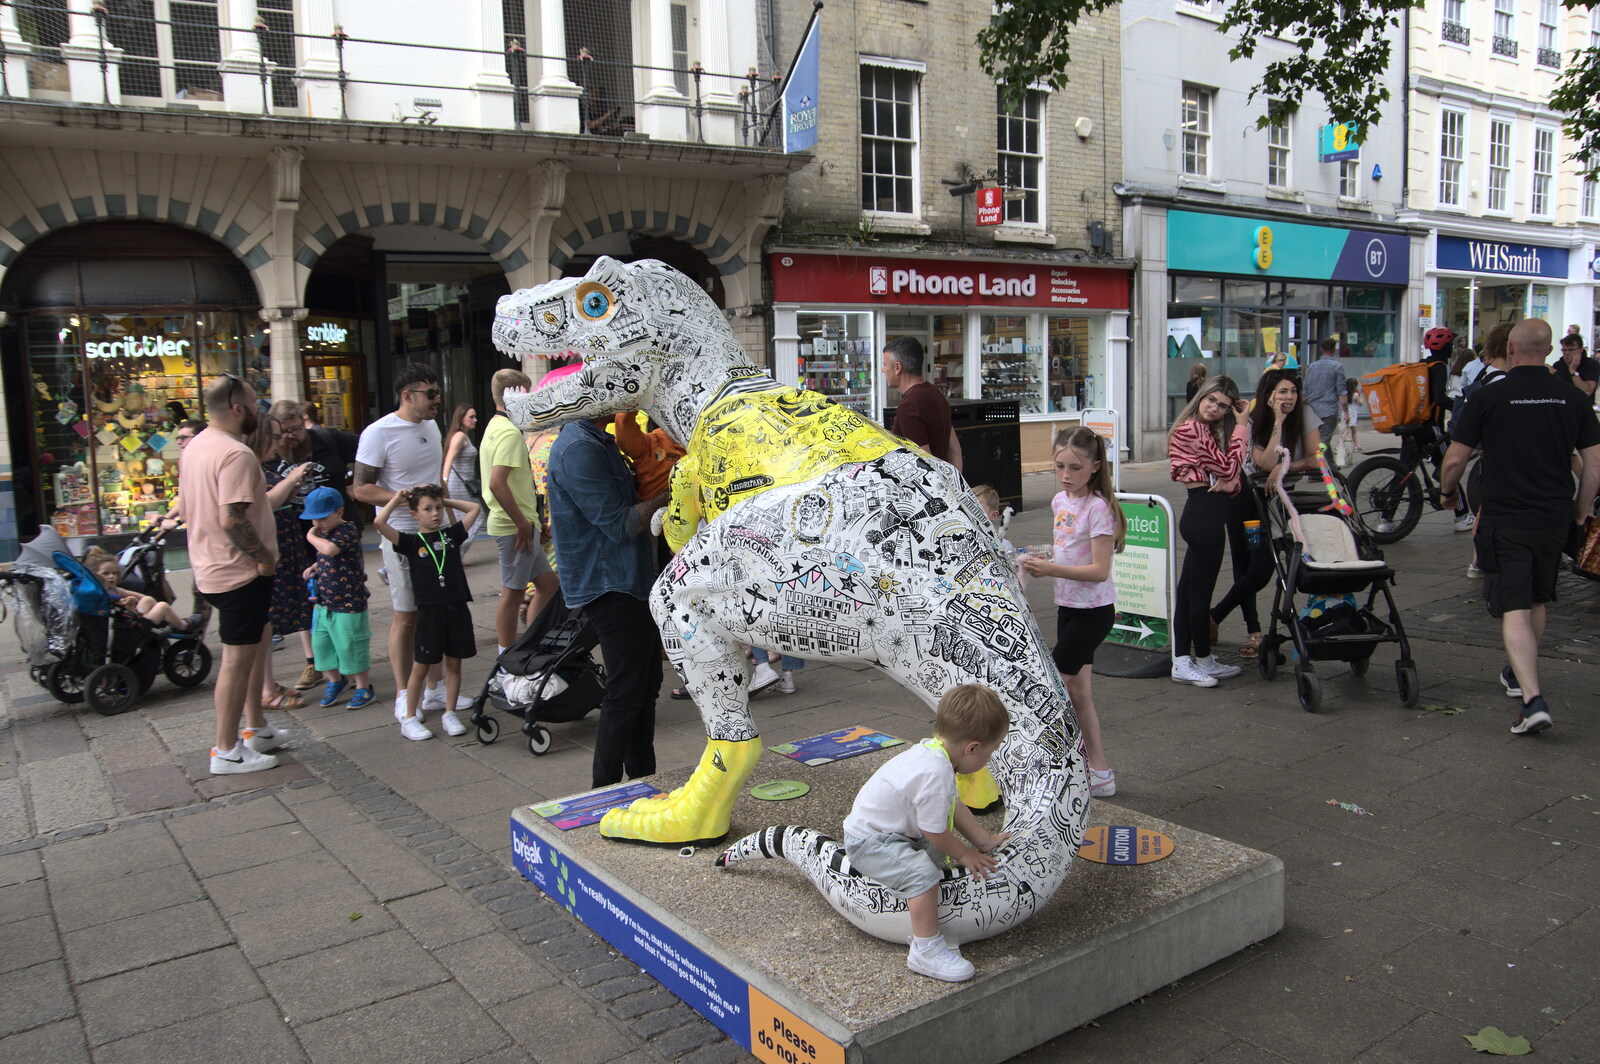 Another dinosaur on Gentlman's Walk from The Lord Mayor's Procession, Norwich, Norfolk - 2nd July 2022